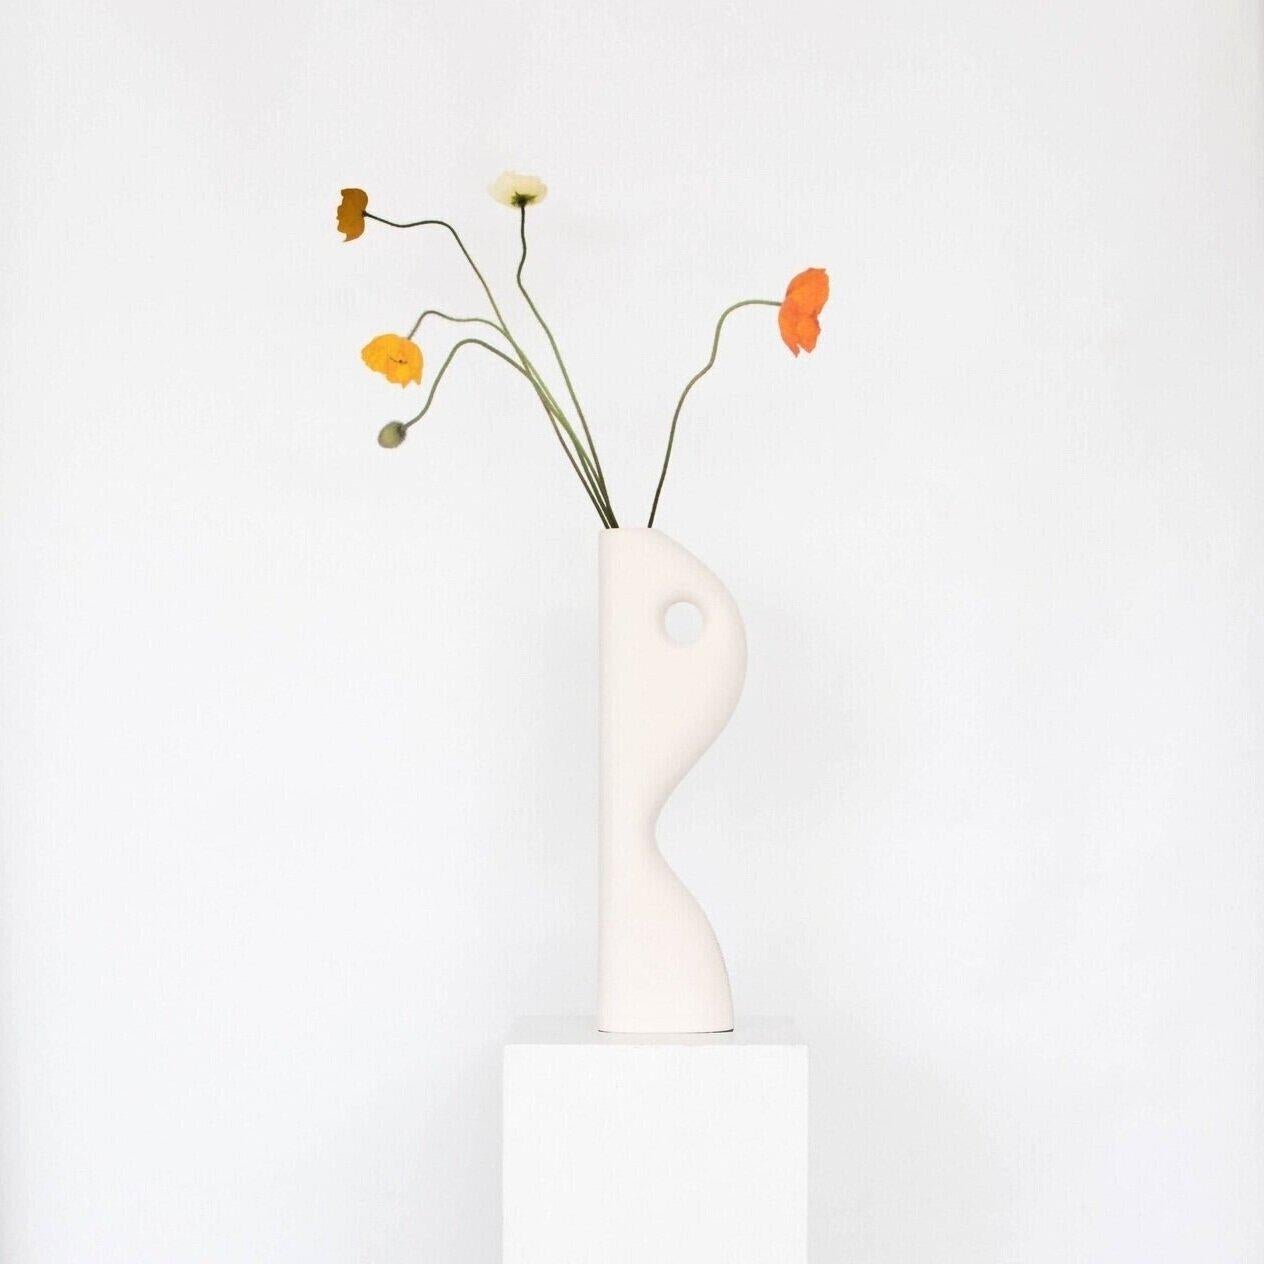 A Set of 8 White Lea Matt Vases by Valeria Vasi
Handmade in Barcelona, 2021
Materials: stoneware, clay
Dimensions: 33,5 x 10 x 4cm
Also available in: Baby blue, terracotta. 

A sculptural stoneware vase entirely crafted in Barcelona by skilful